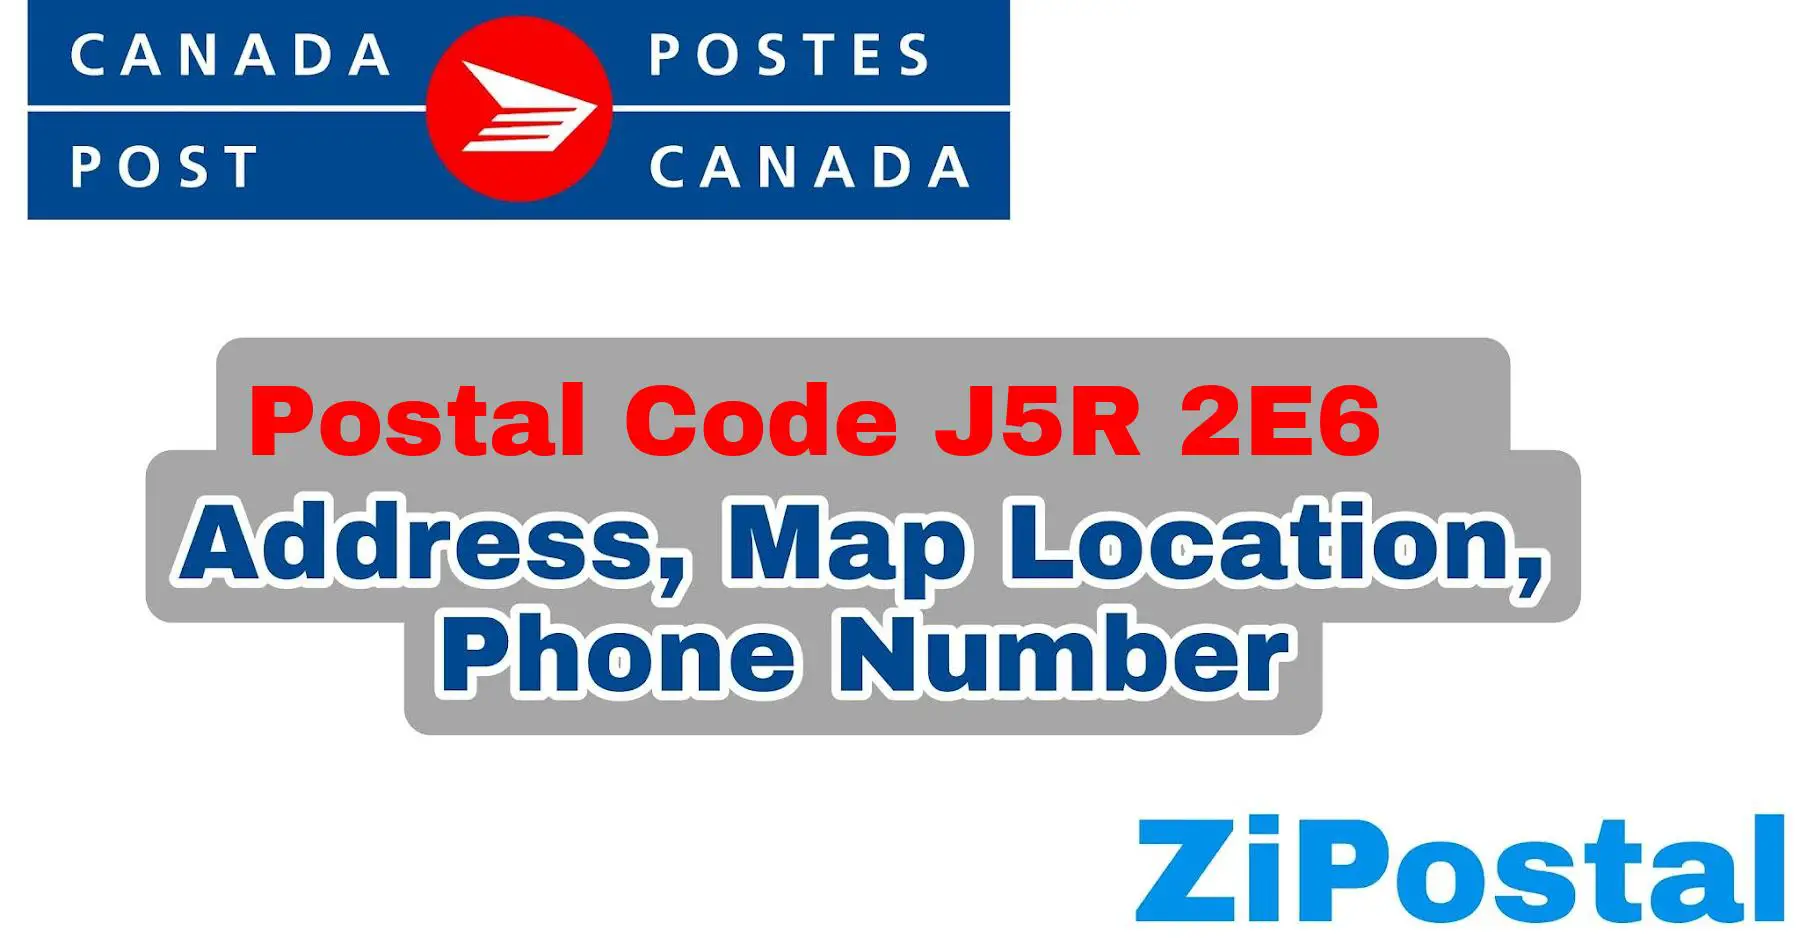 Postal Code J5R 2E6 Address Map Location and Phone Number